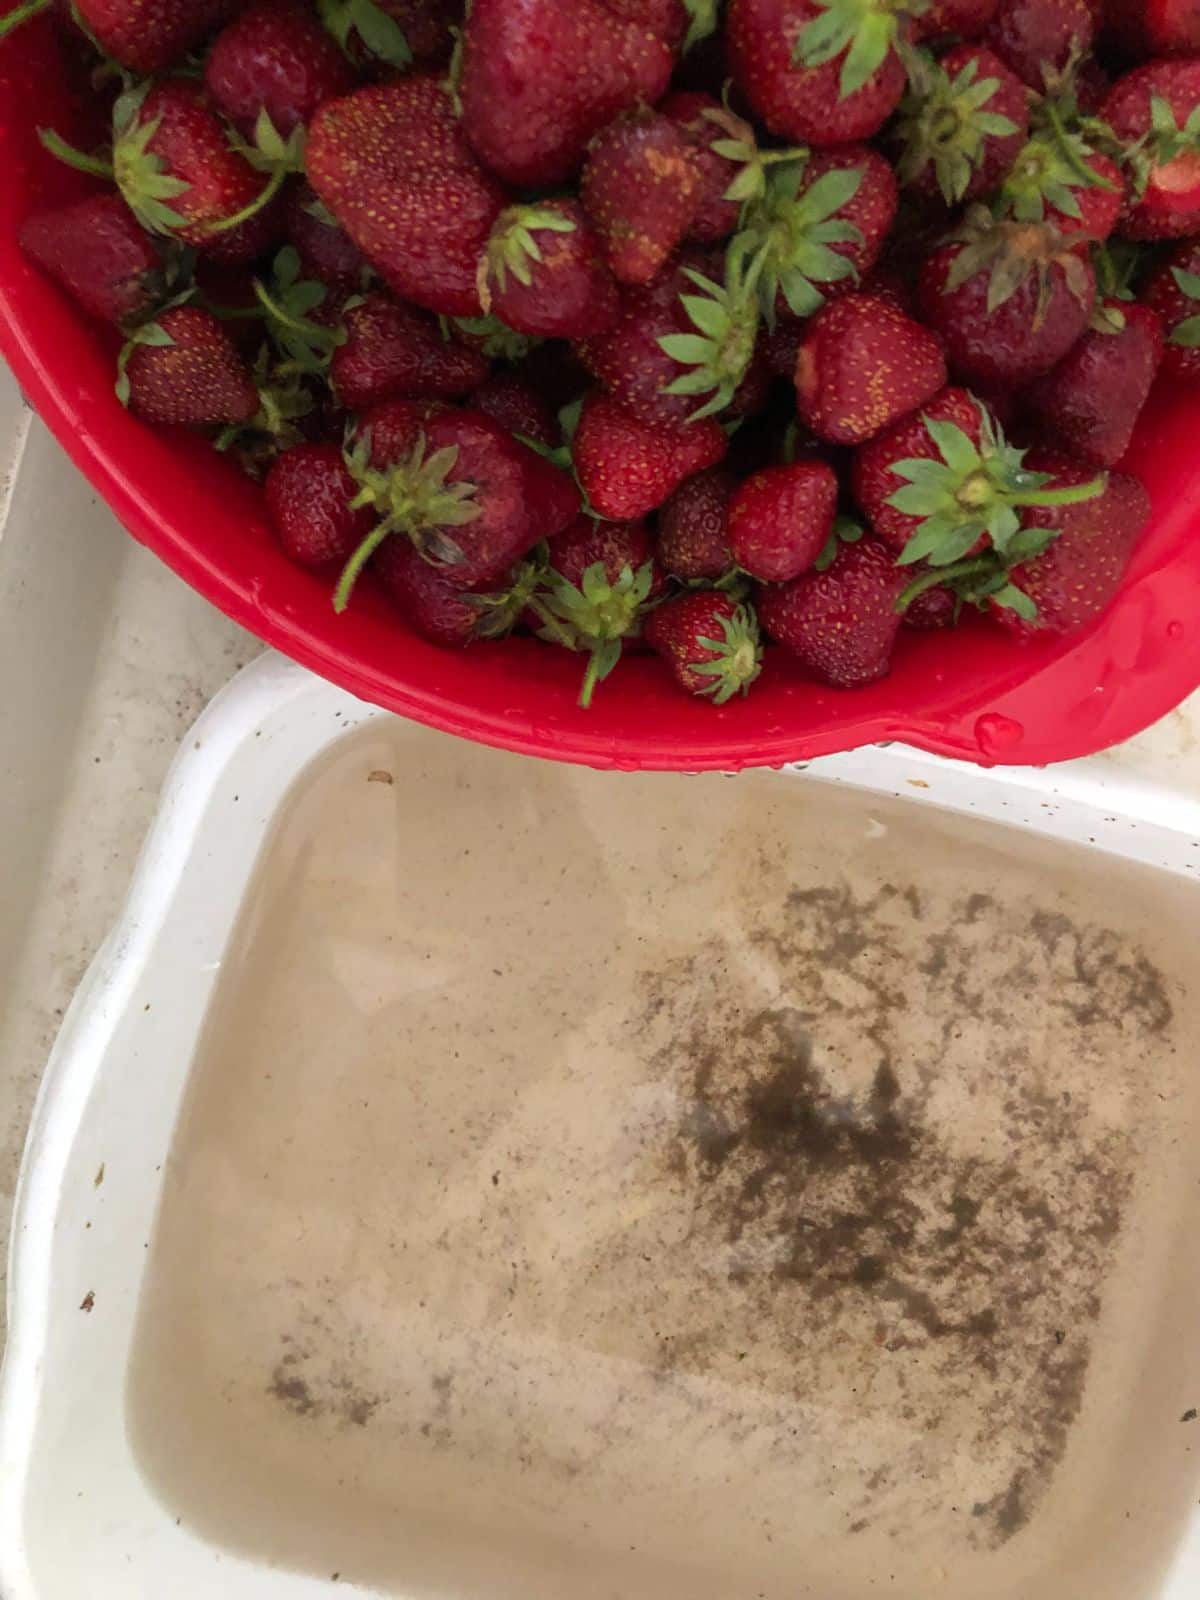 Strawberries being washed just before use